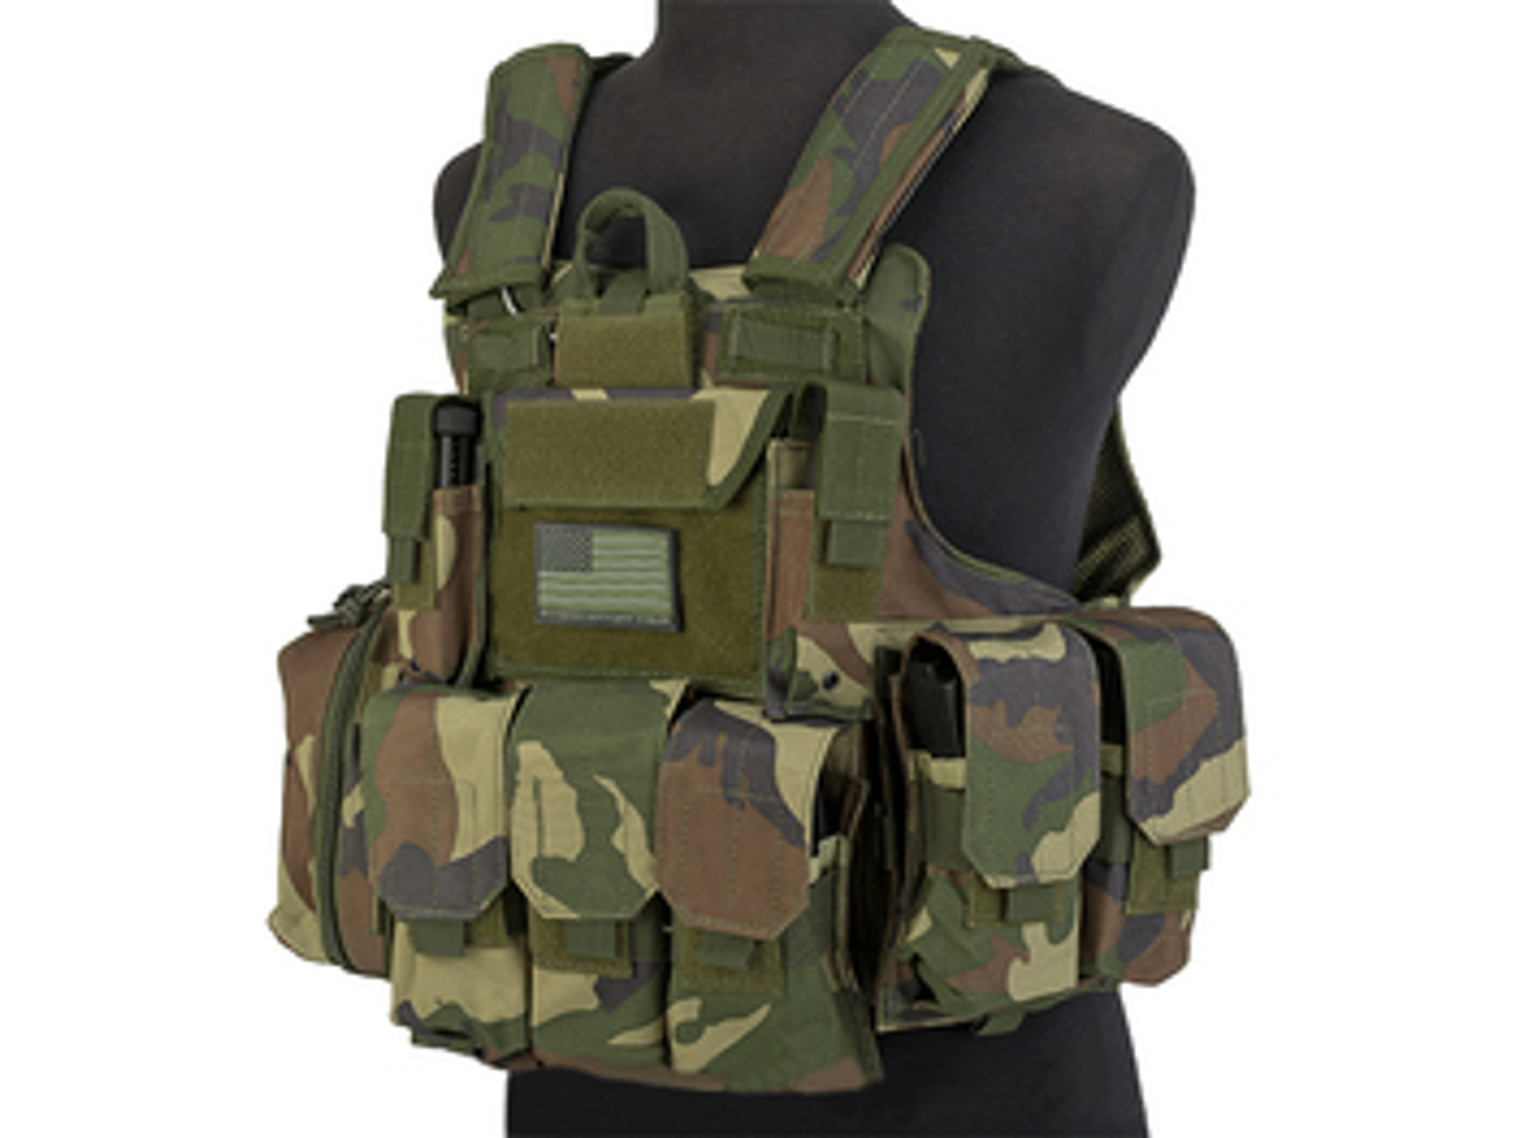 USMC Style C.I.R.A.S. Type Force Recon Tactical Vest w/ Full Pouch System - Woodland